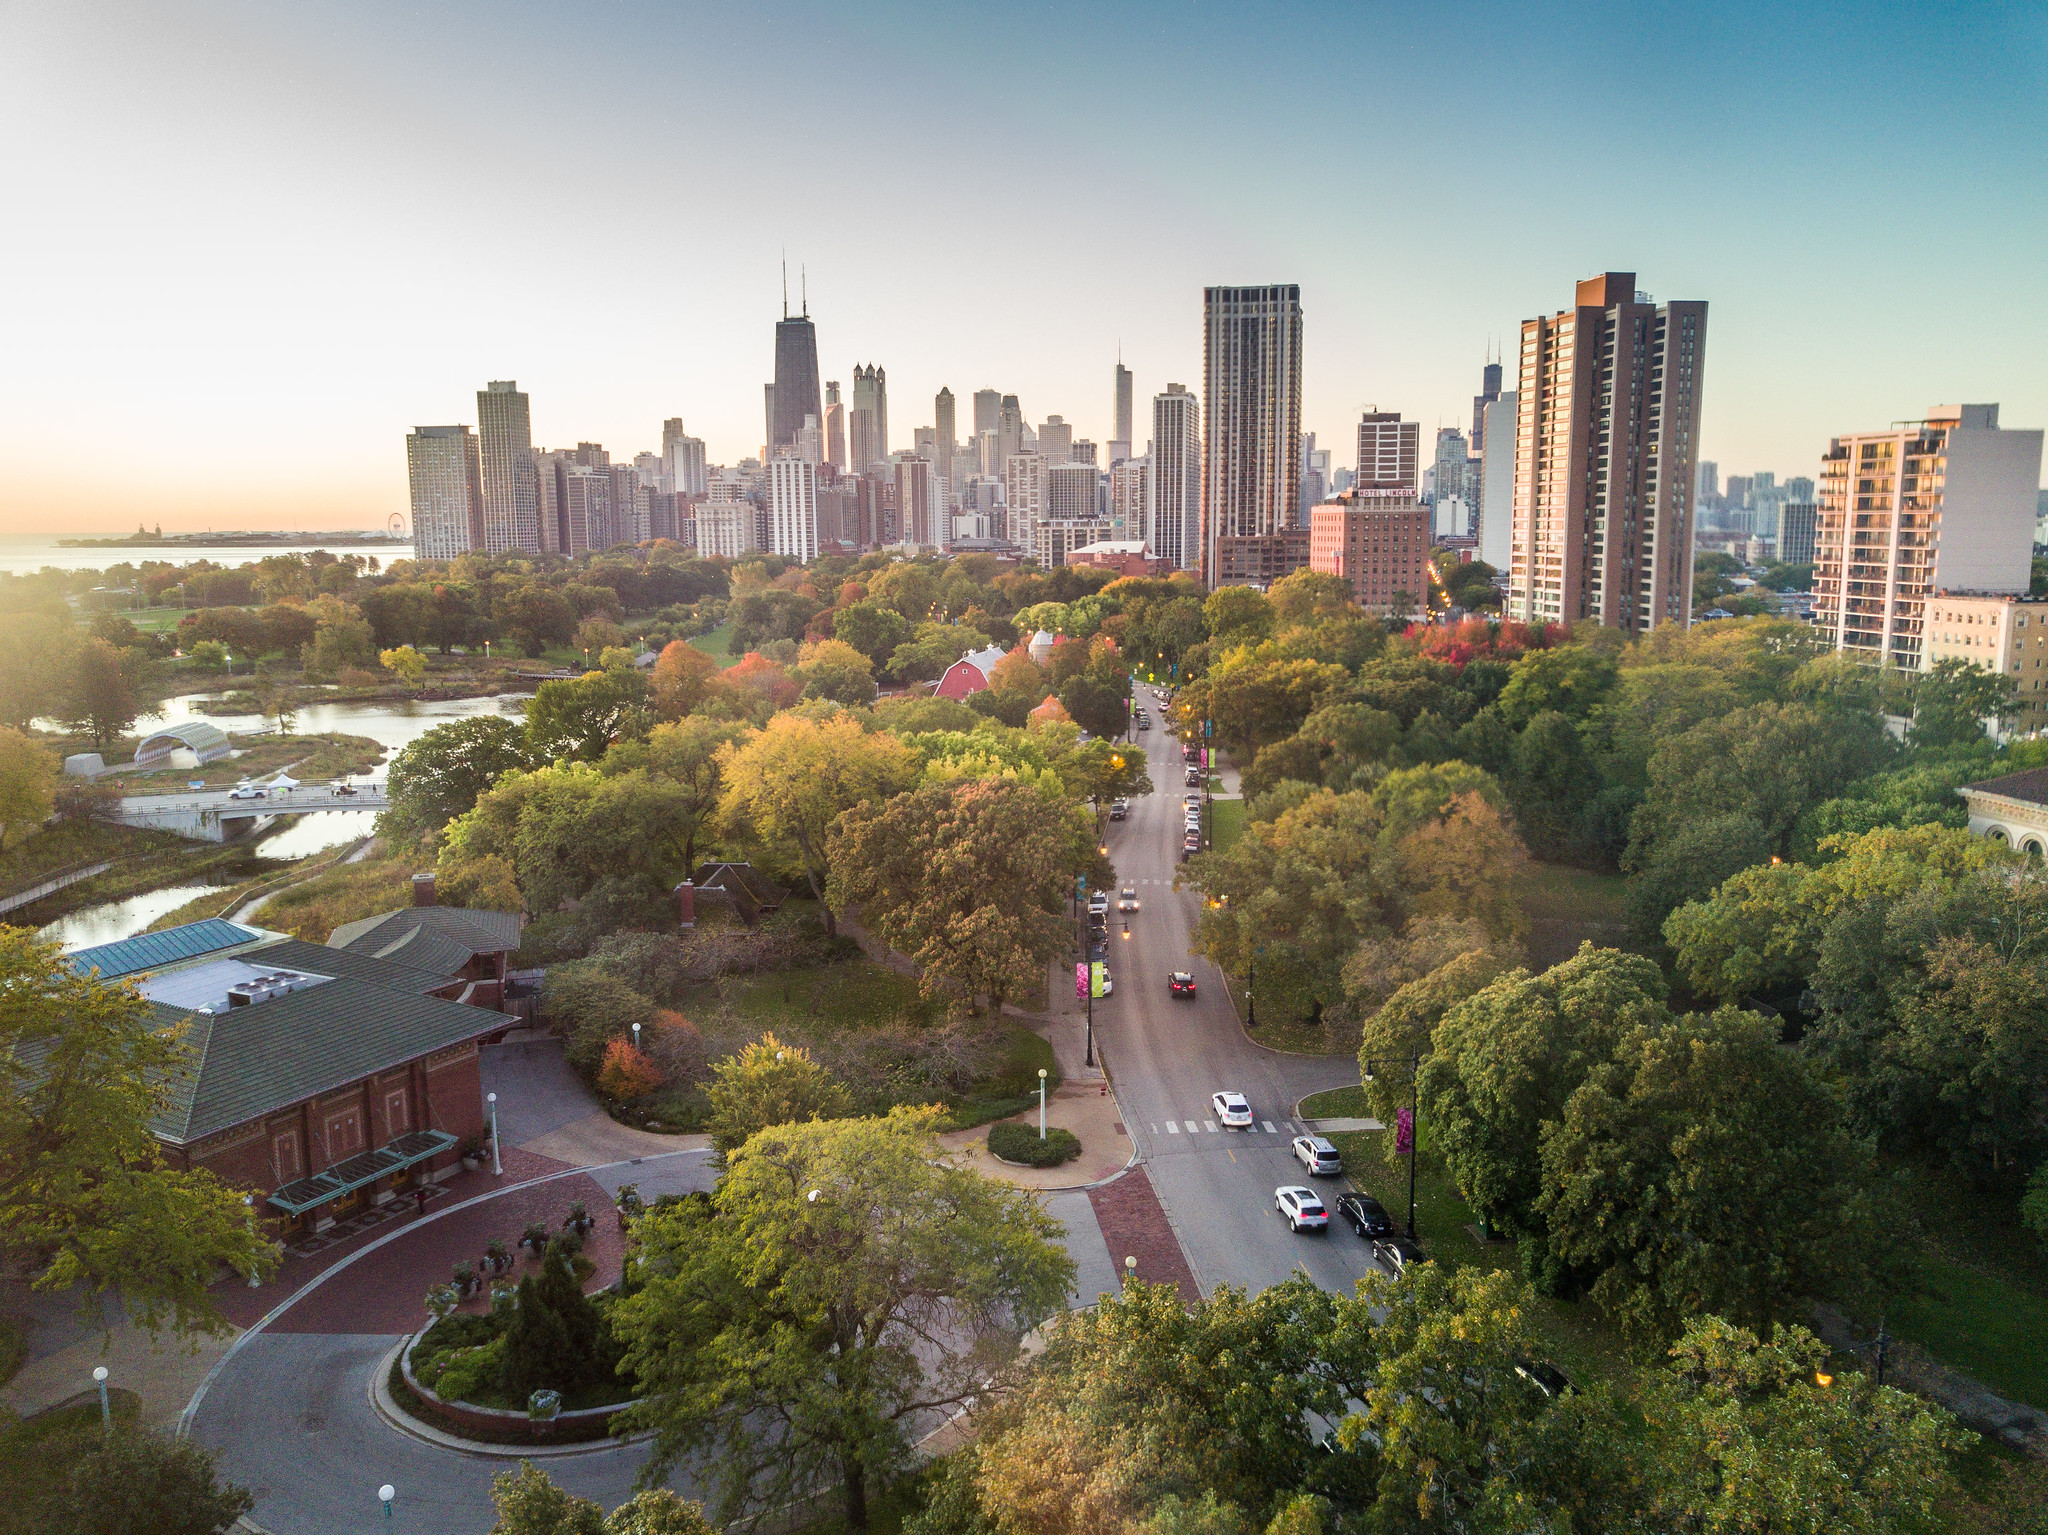 Chicago’s Lincoln Park & Its Spring Offerings